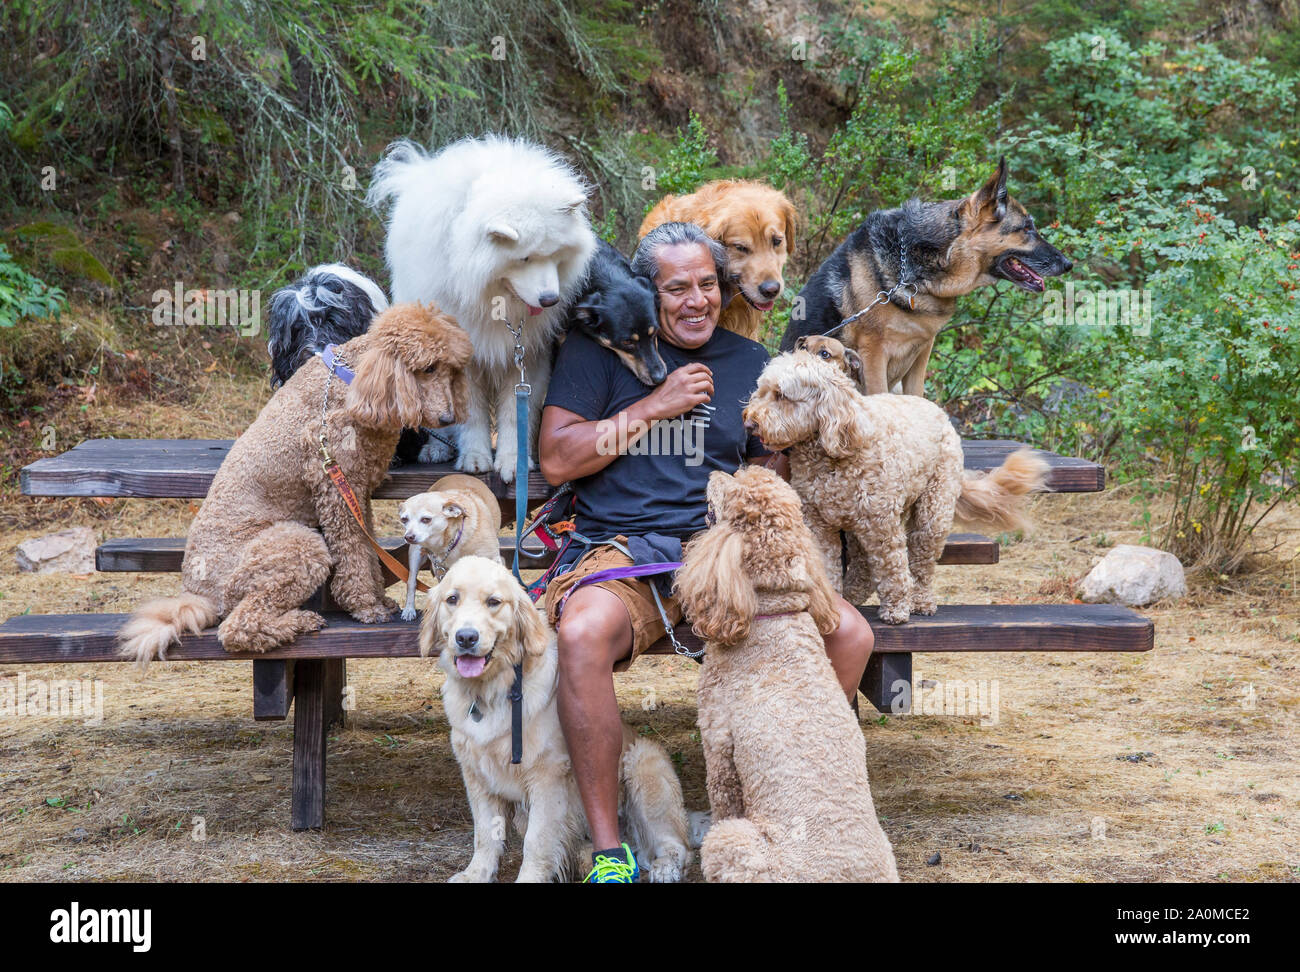 Professional dog walker and trainer Juan Carlos Zuniga surrounded by canine 'clients' on a park bench while taking a break from walking. Stock Photo